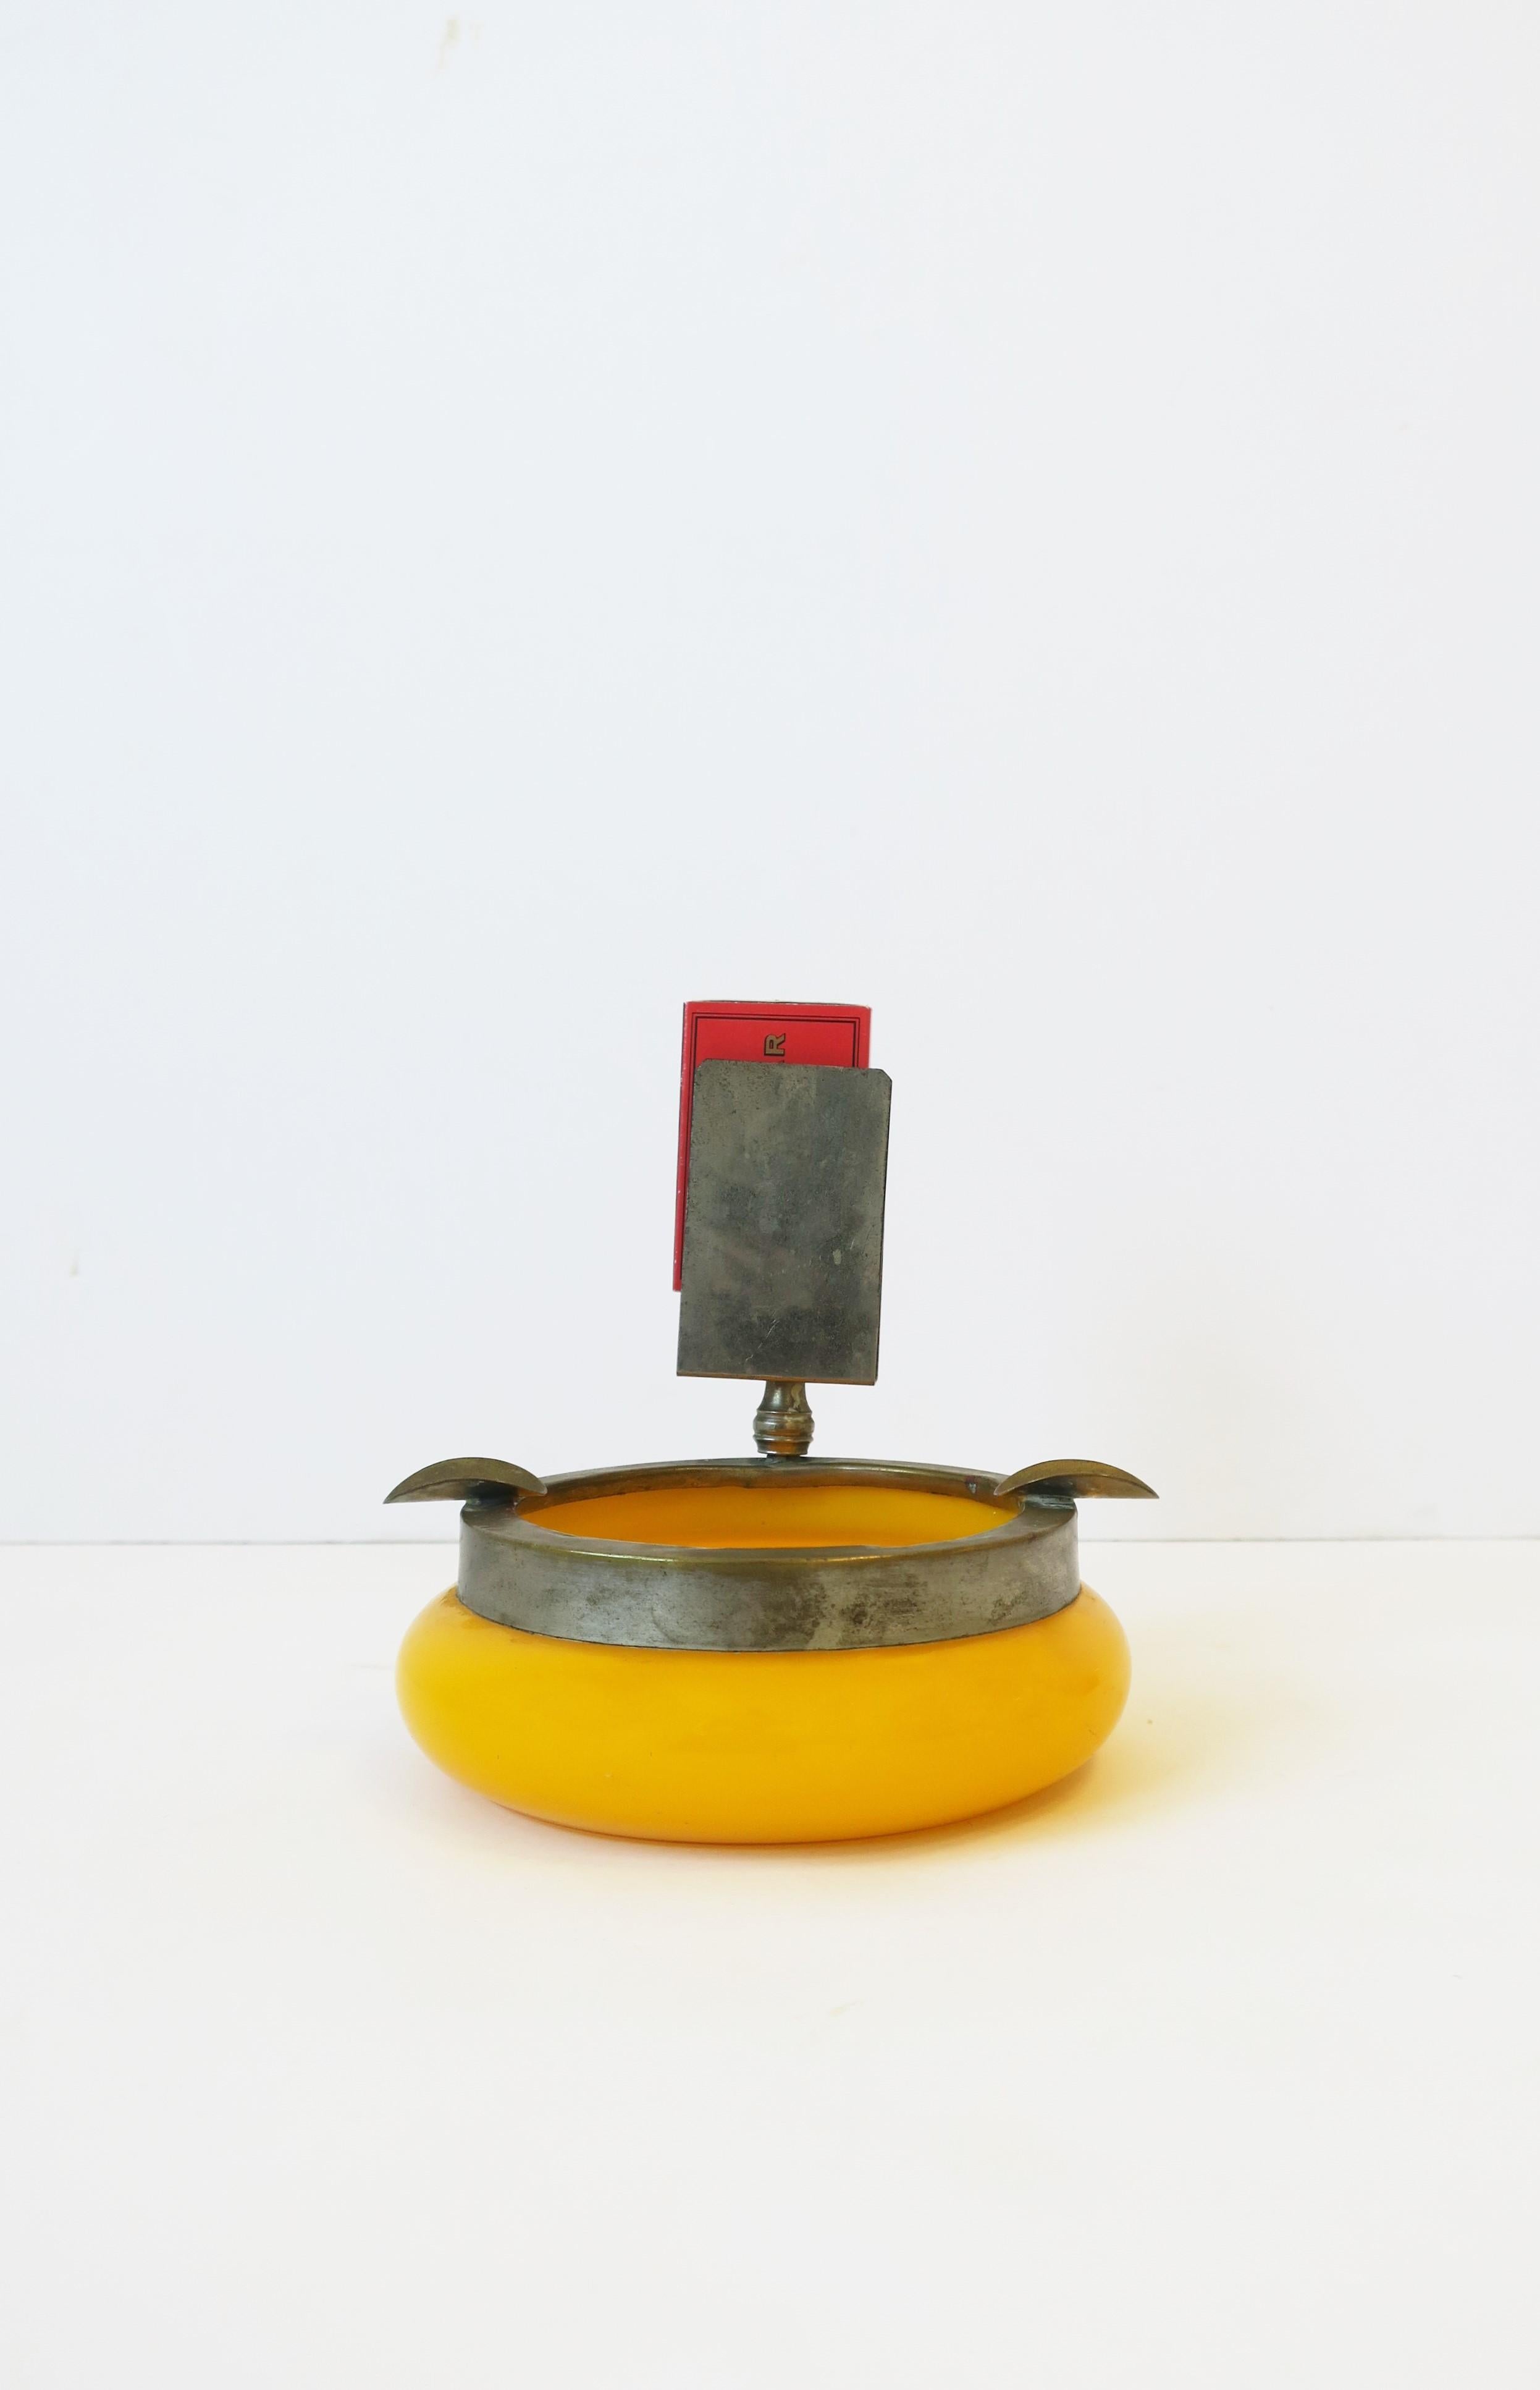 A yellow-orange art glass ashtray with protective metal edge, cigarette supports and matchbox holder area, circa early to mid-20th century, Slovenia. 

Dimensions: 4.75